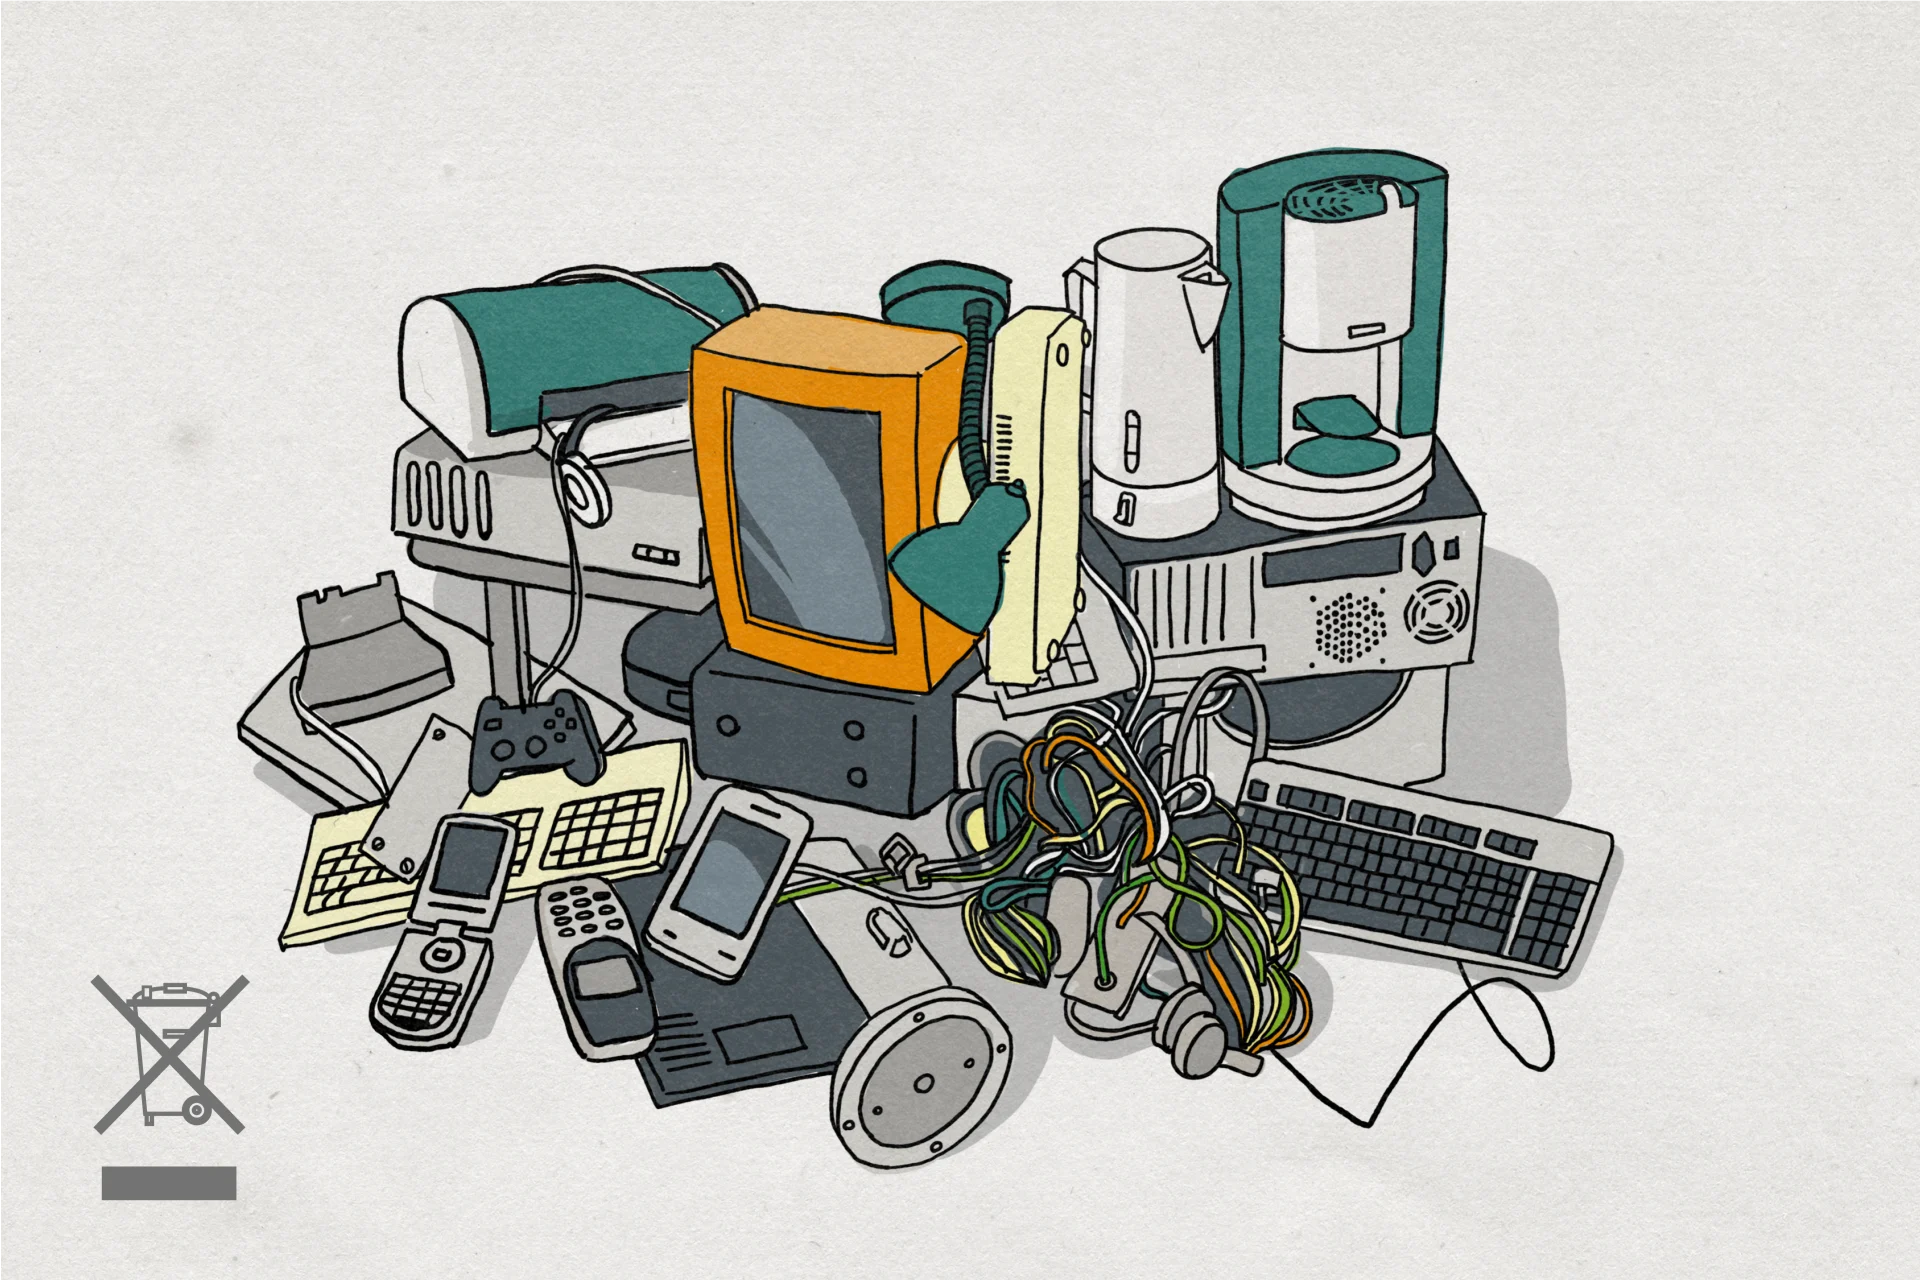 Illustration of entertainment electronics, household appliances and lights